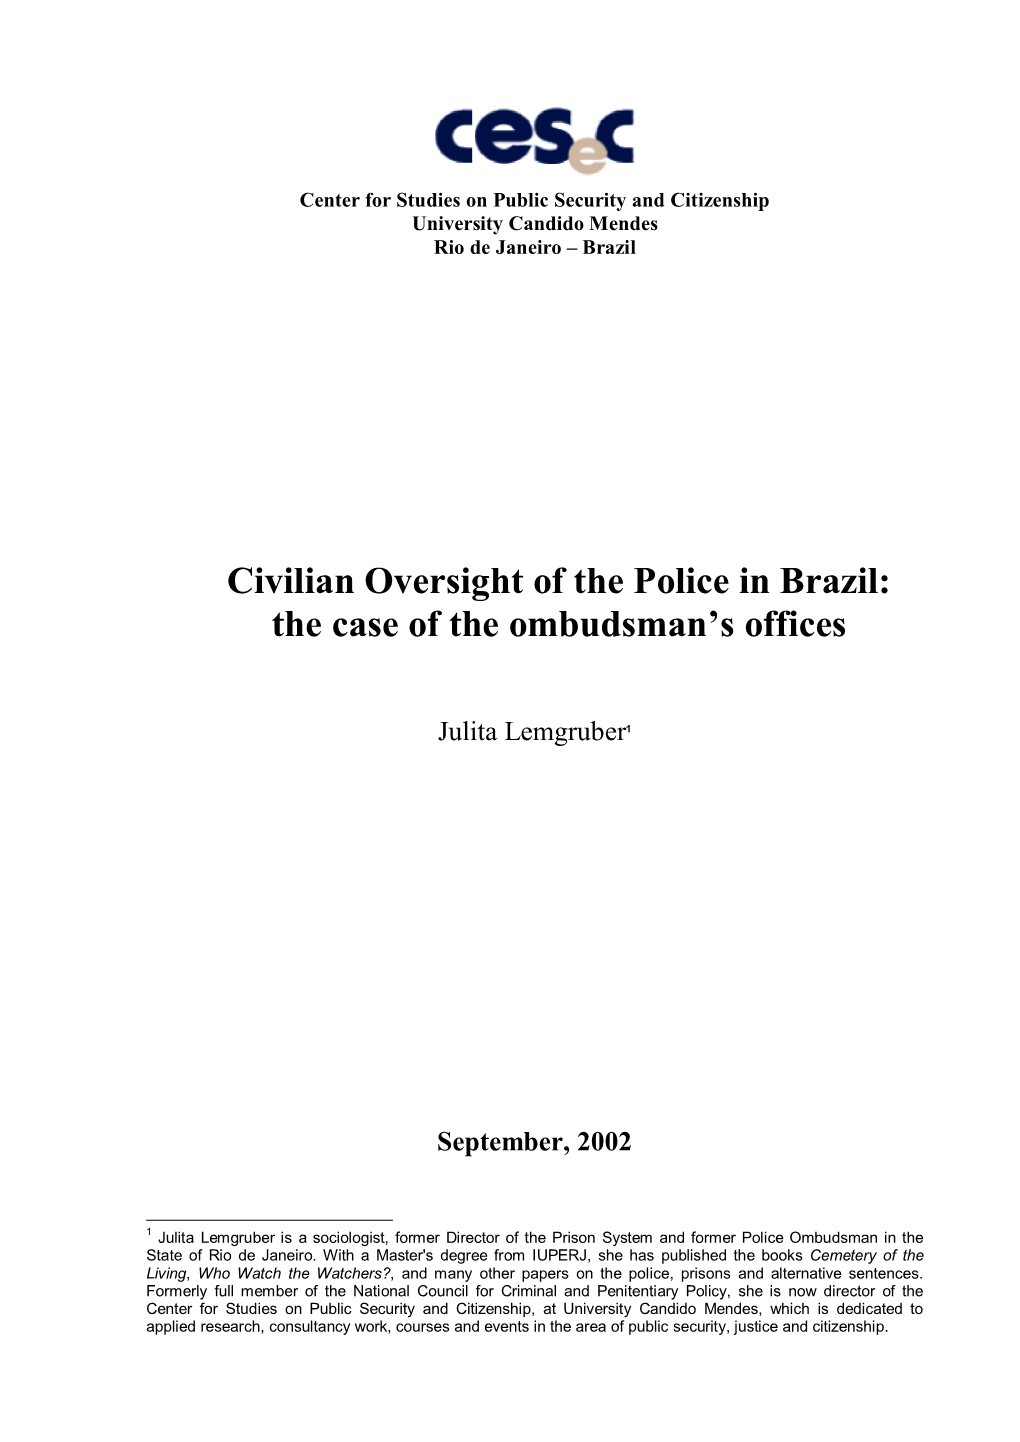 Civilian Oversight of the Police in Brazil: the Case of the Ombudsman’S Offices